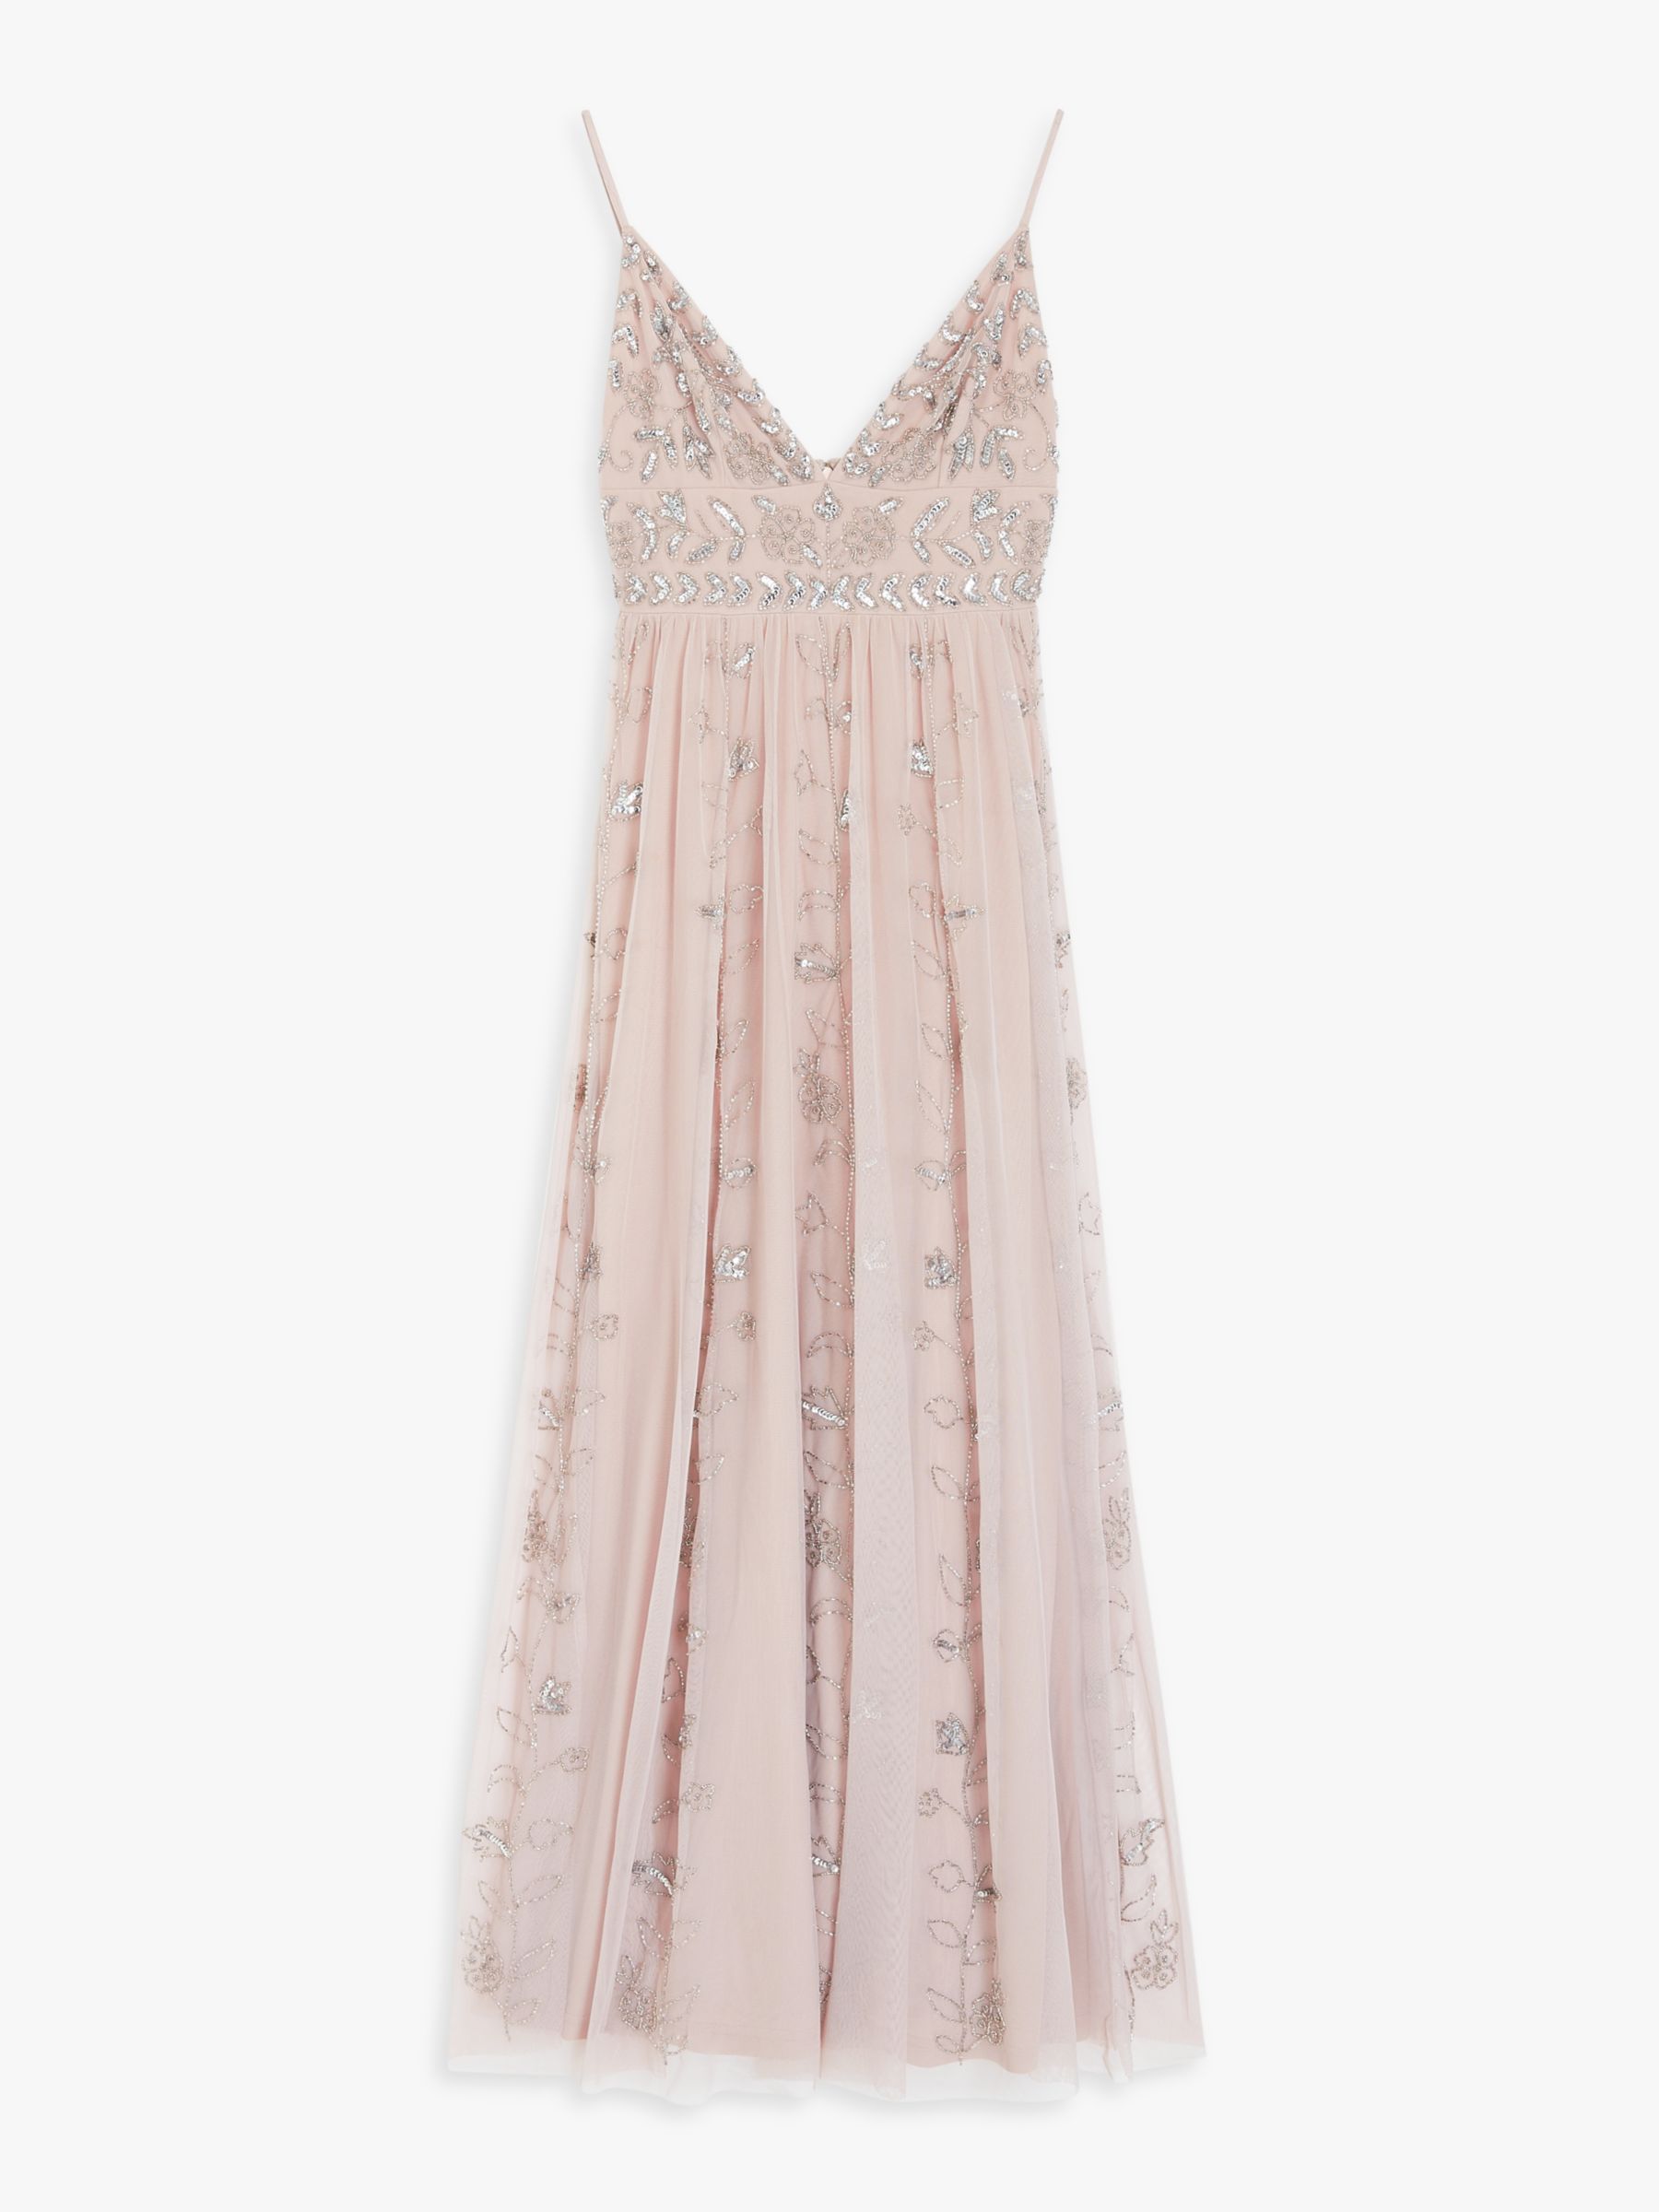 Lace Maxi Dress by Maeve